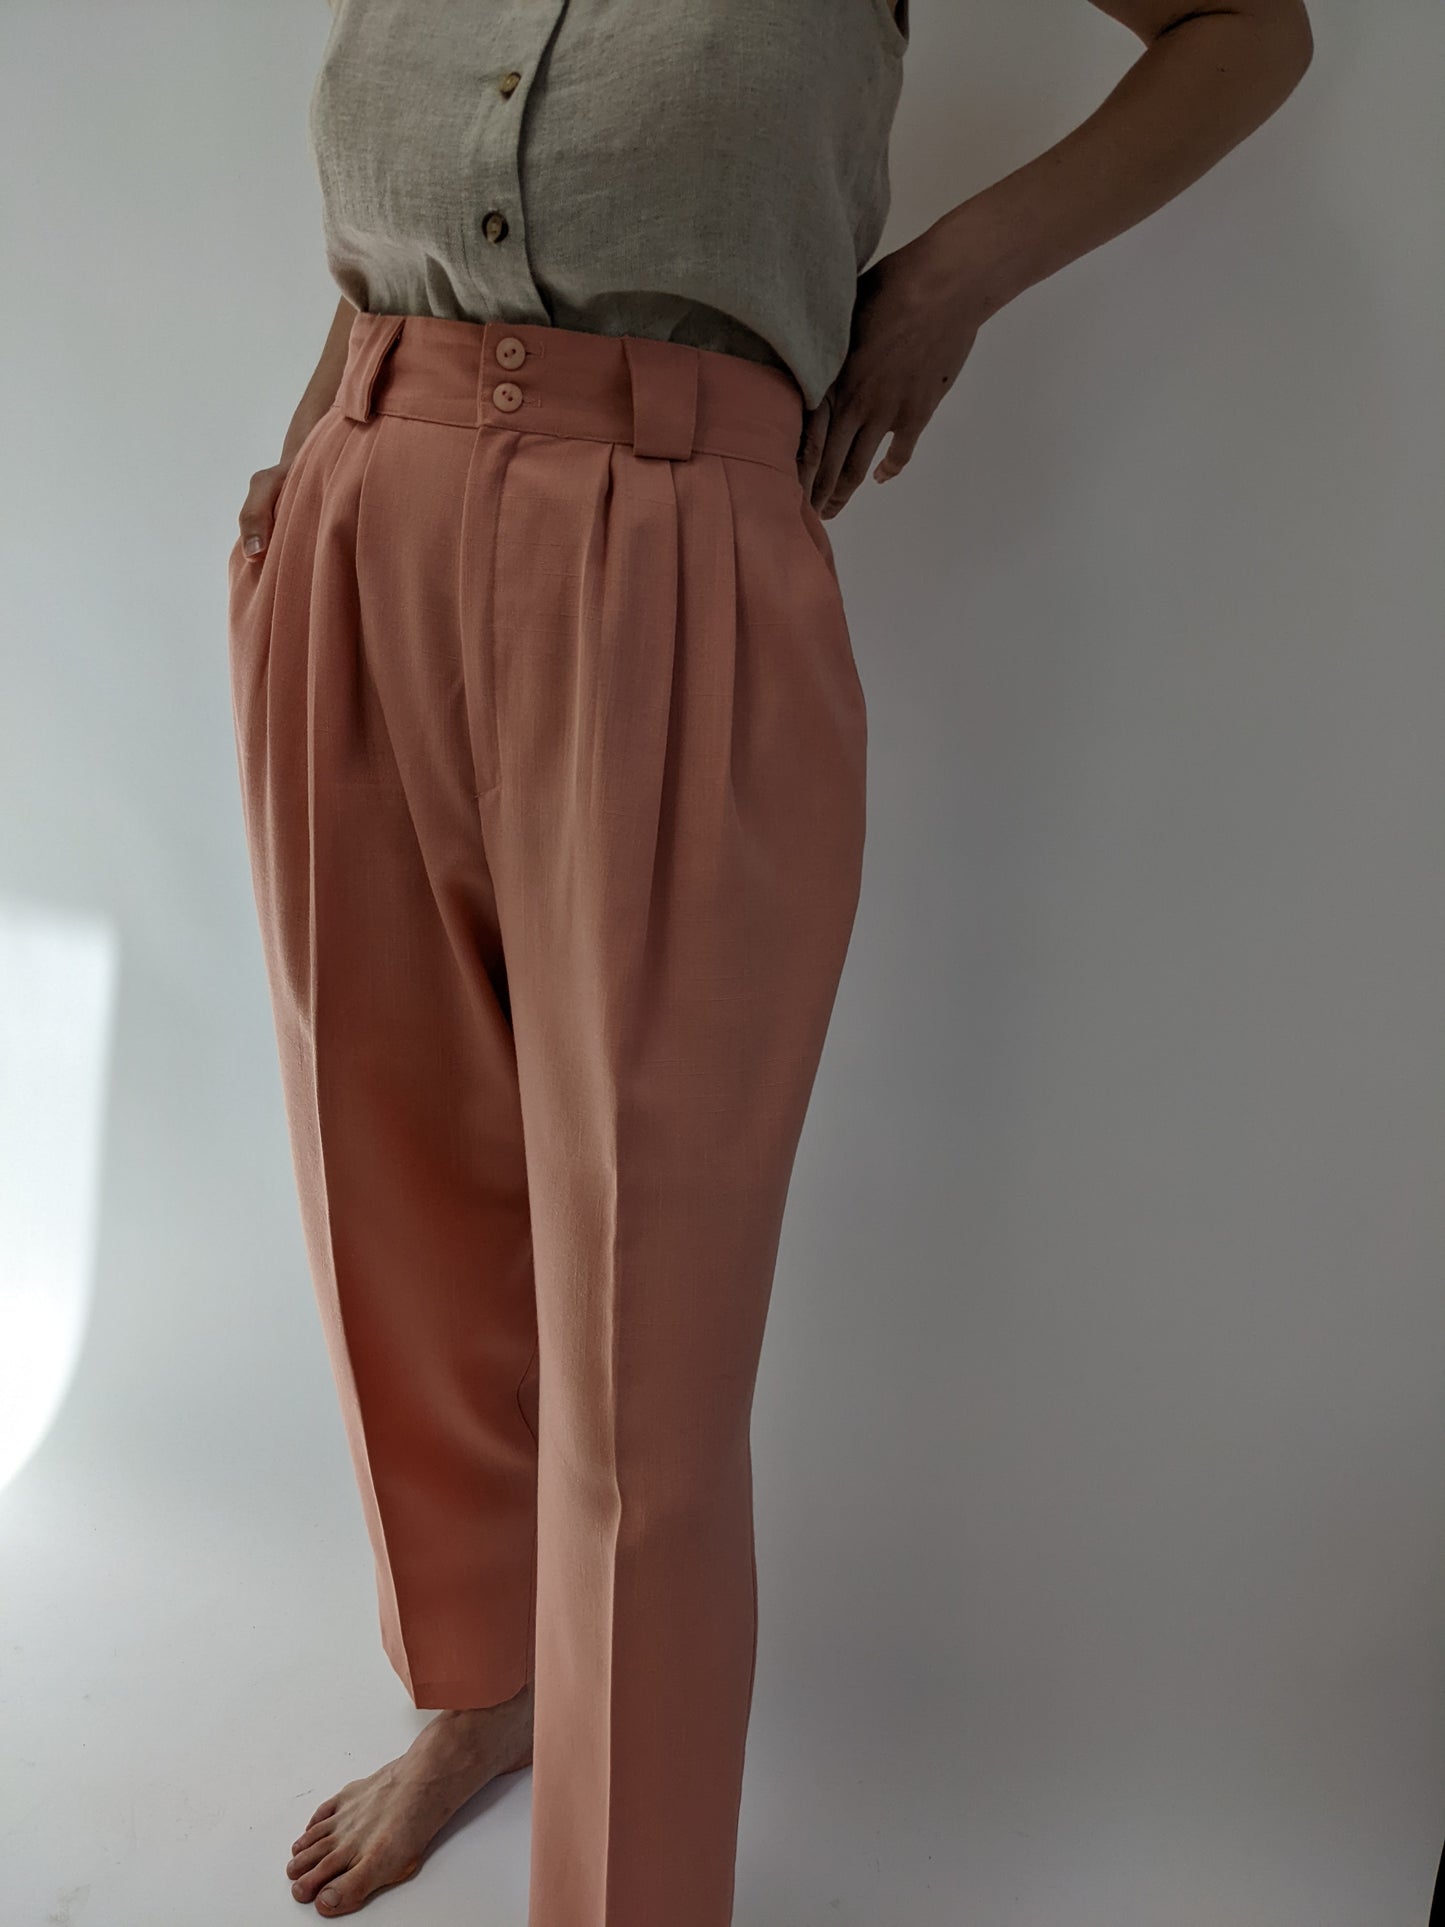 Vintage Salmon Woven & Pleated Trousers